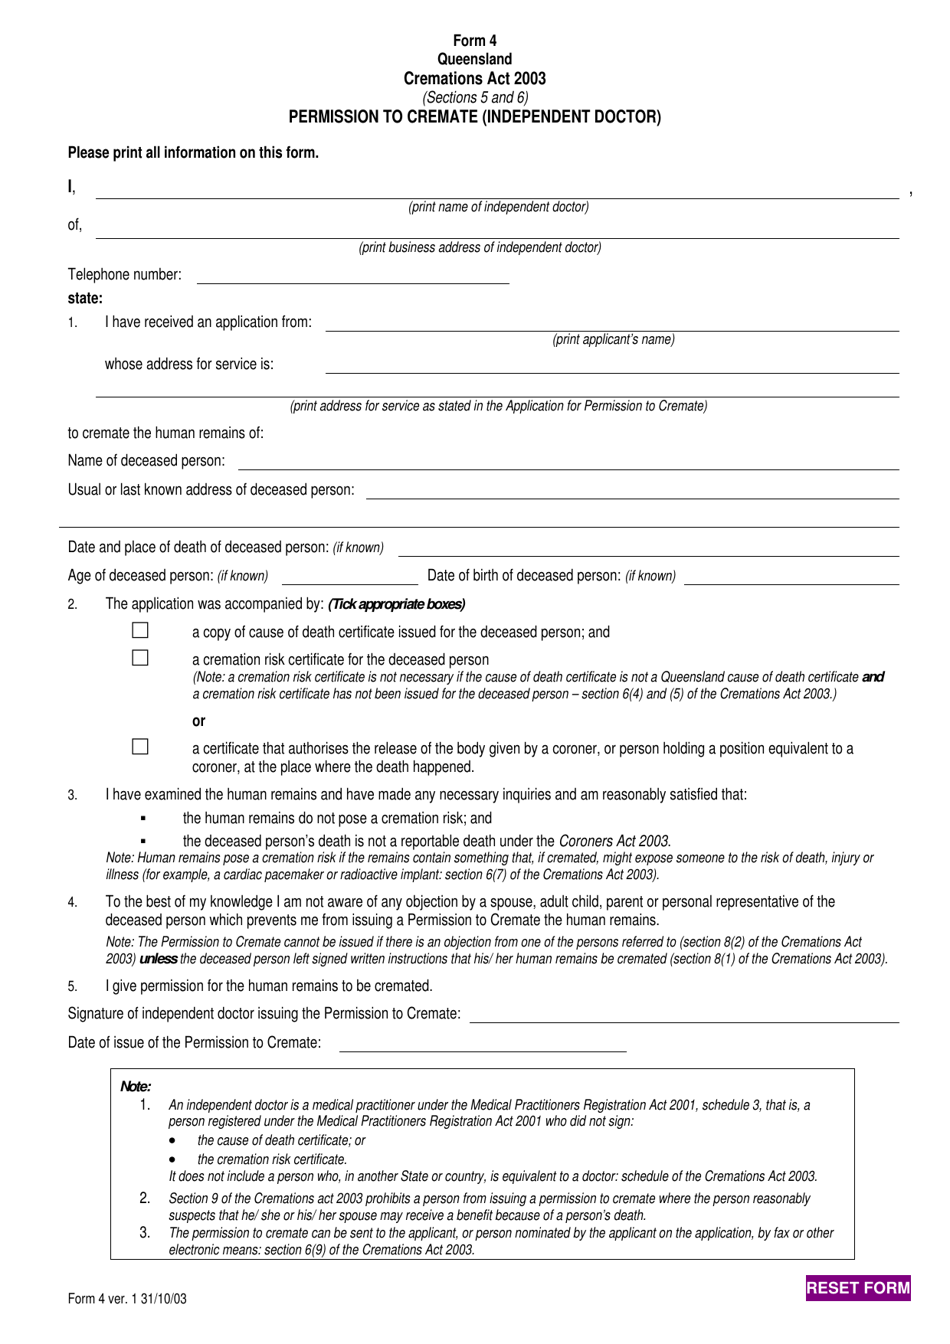 Form 4 Permission to Cremate (Independent Doctor) - Queensland, Australia, Page 1